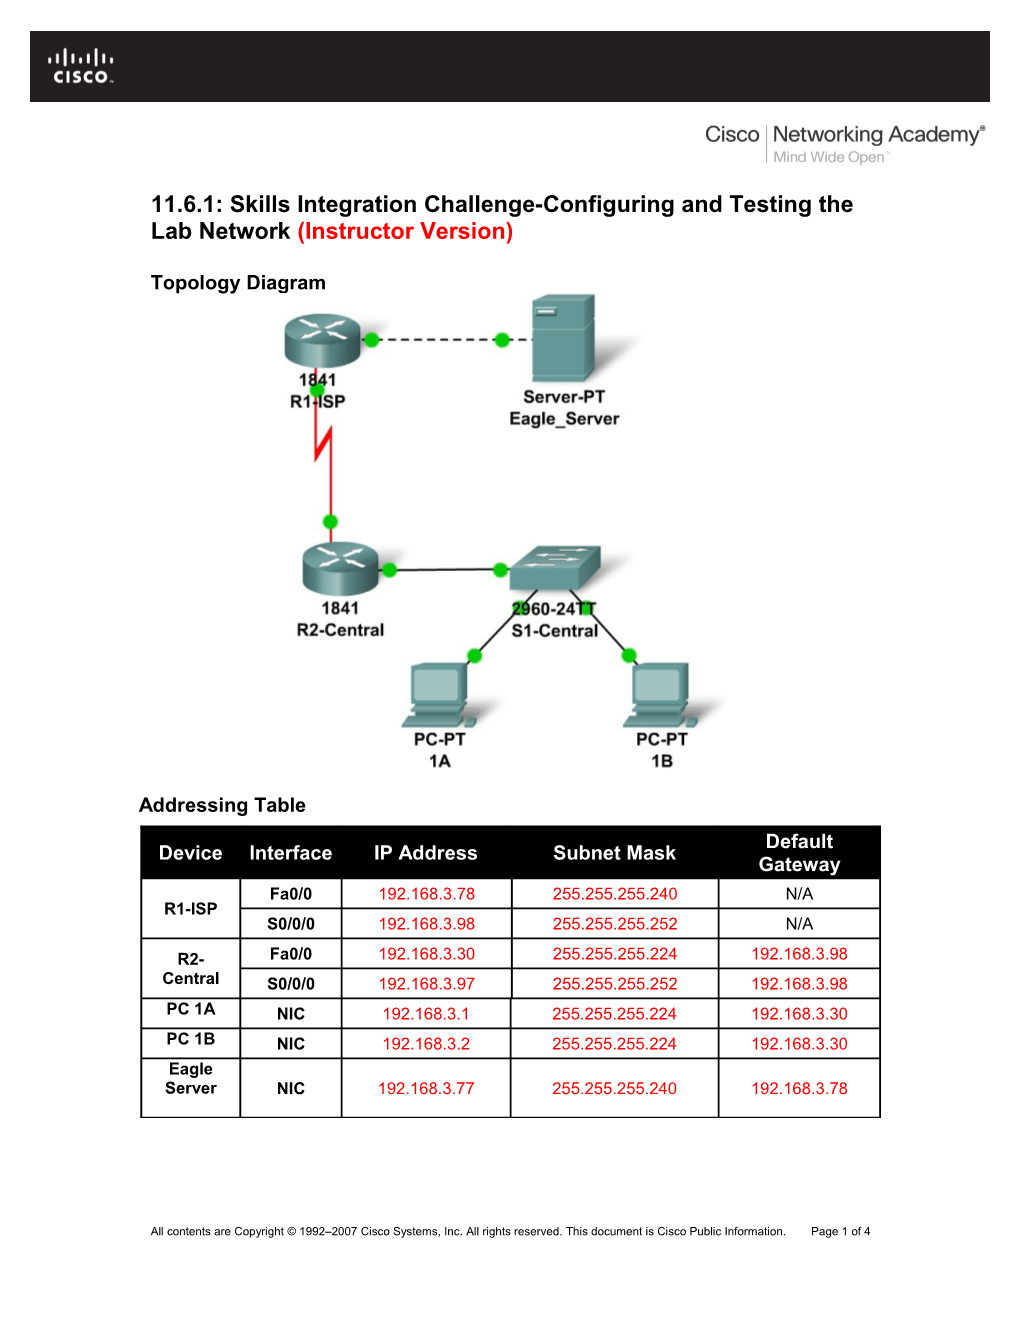 11.6.1: Skills Integration Challenge-Configuring and Testing the Lab Network (Instructor